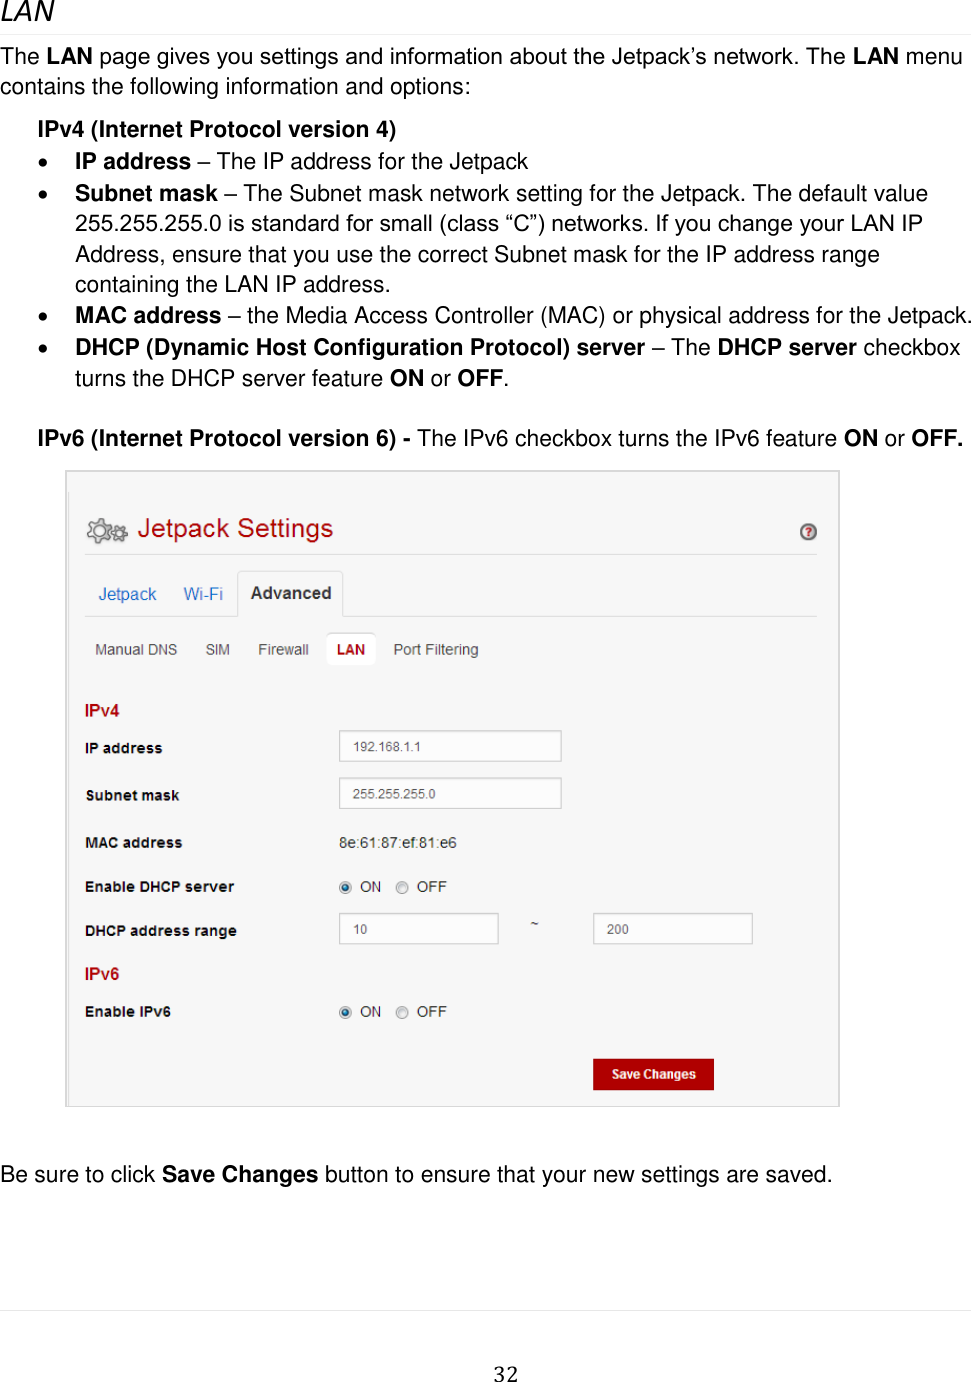   32  LAN The LAN page gives you settings and information about the Jetpack’s network. The LAN menu contains the following information and options: IPv4 (Internet Protocol version 4)  IP address – The IP address for the Jetpack  Subnet mask – The Subnet mask network setting for the Jetpack. The default value 255.255.255.0 is standard for small (class “C”) networks. If you change your LAN IP Address, ensure that you use the correct Subnet mask for the IP address range containing the LAN IP address.  MAC address – the Media Access Controller (MAC) or physical address for the Jetpack.  DHCP (Dynamic Host Configuration Protocol) server – The DHCP server checkbox turns the DHCP server feature ON or OFF.  IPv6 (Internet Protocol version 6) - The IPv6 checkbox turns the IPv6 feature ON or OFF.               Be sure to click Save Changes button to ensure that your new settings are saved.   